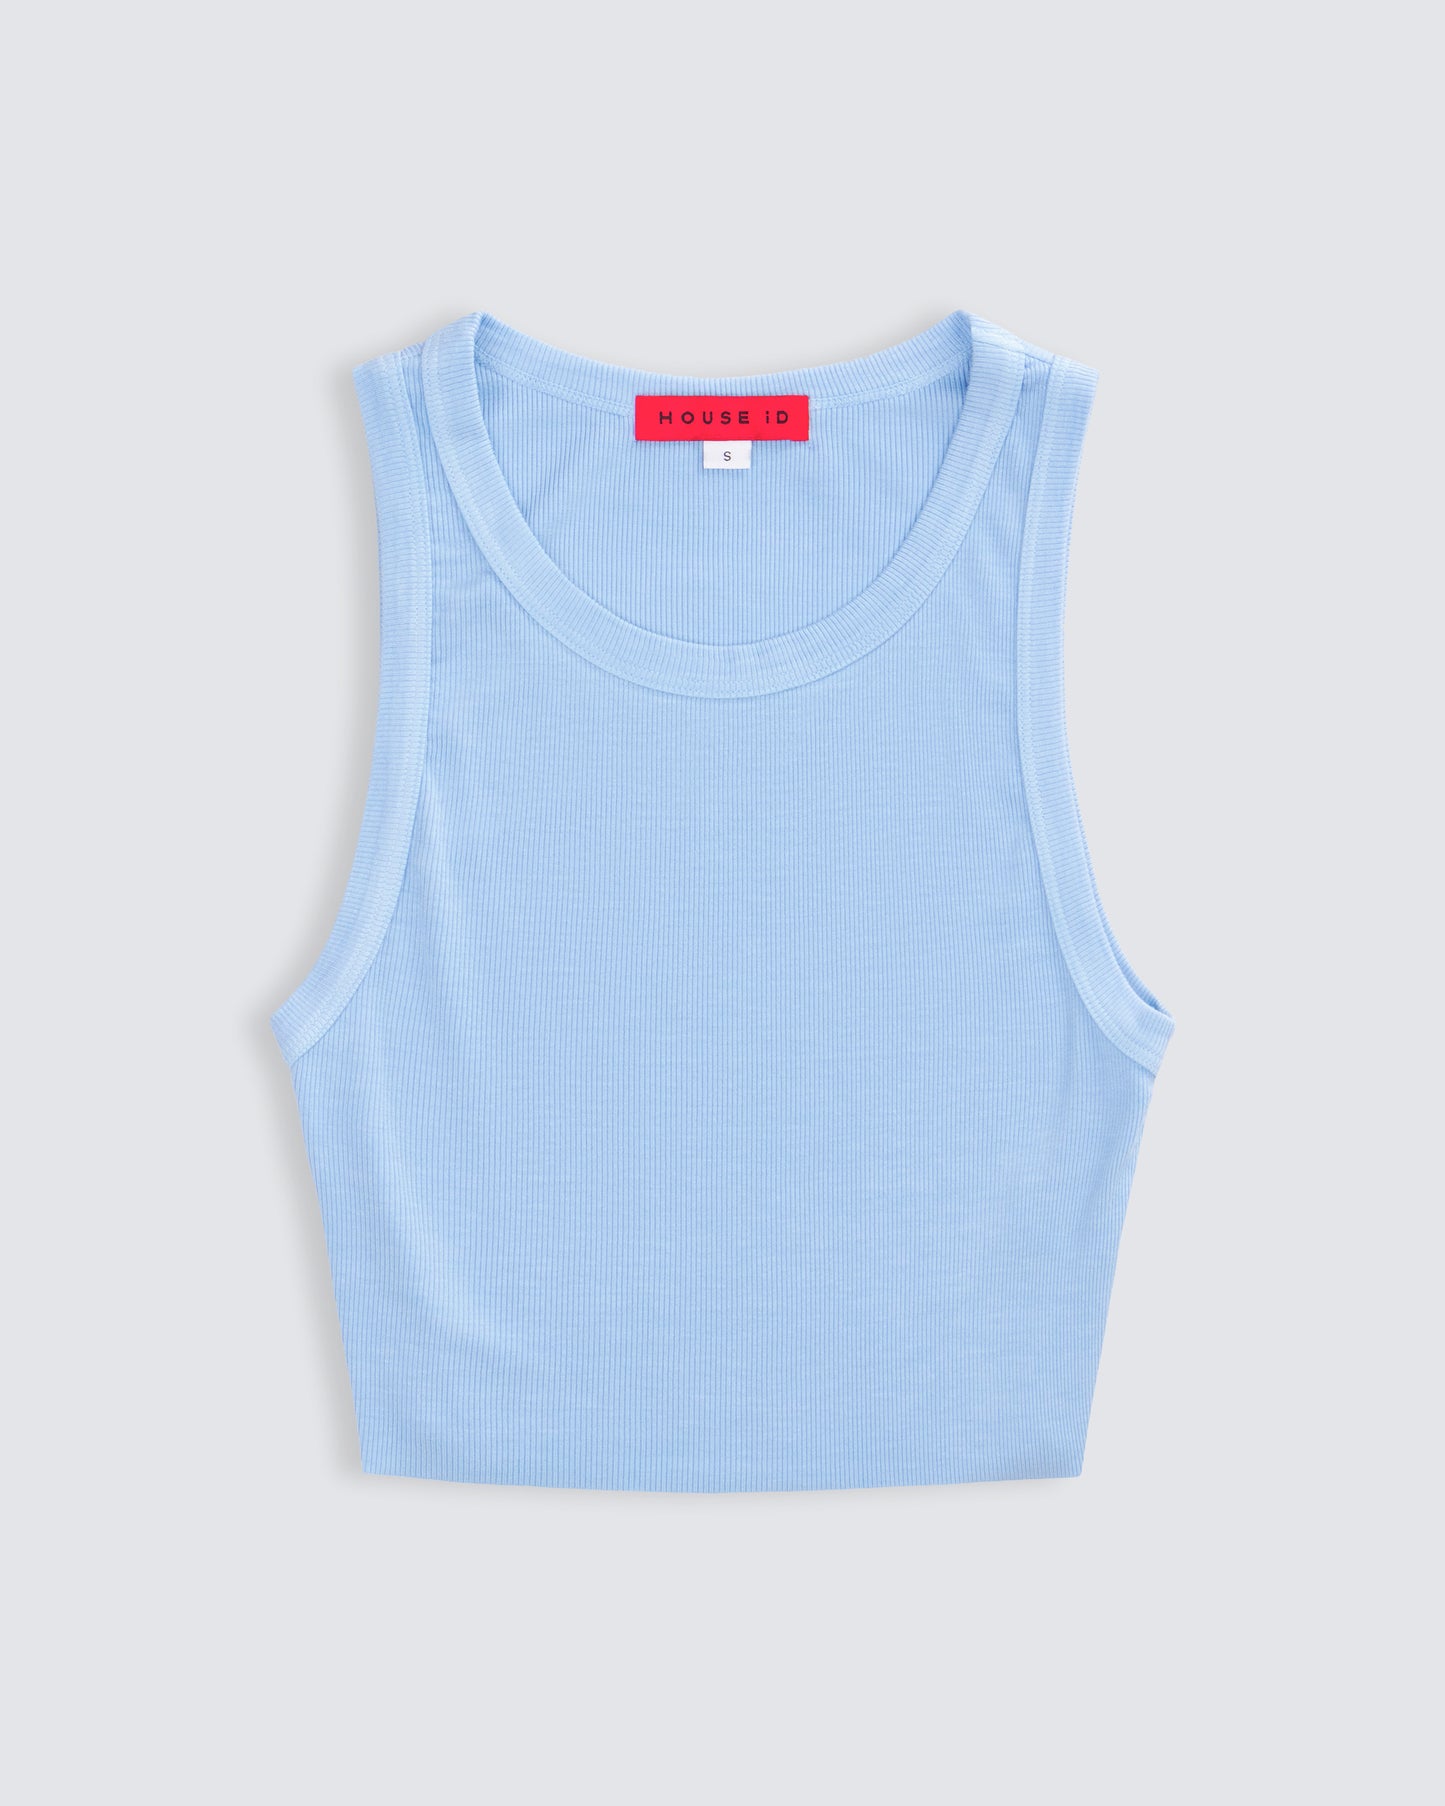 Womens cropped ribbed tank in sky blue